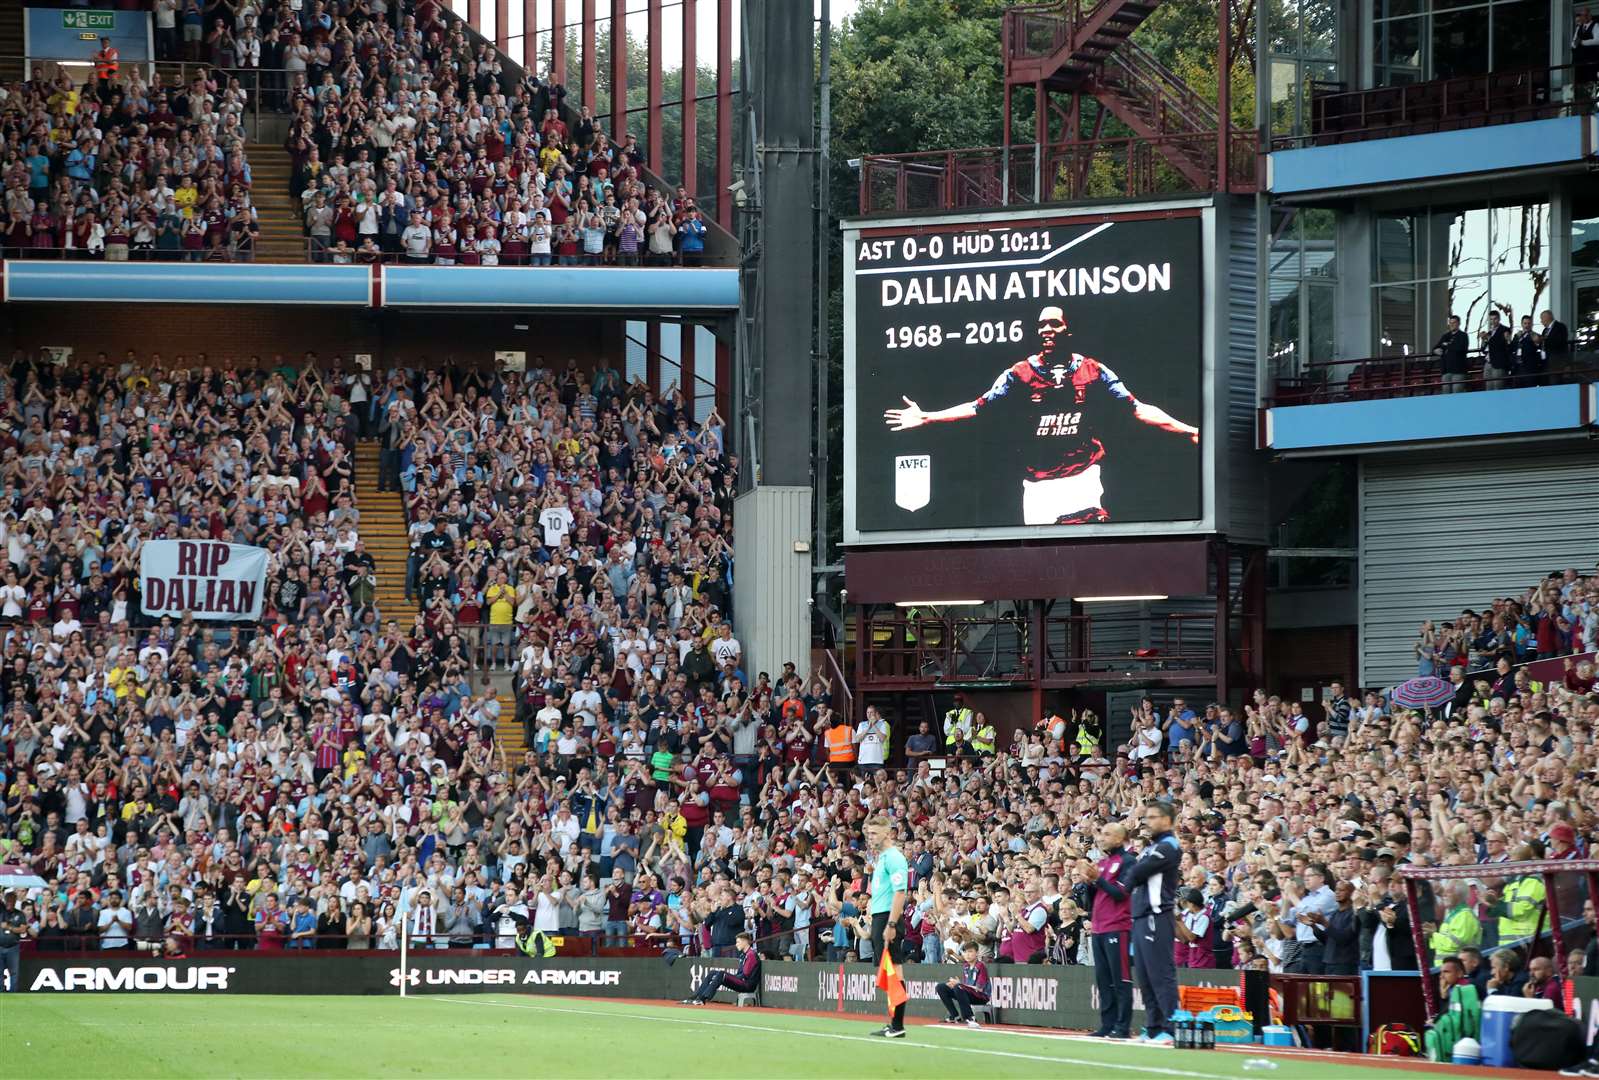 A tribute to Dalian Atkinson at Villa Park after his death in 2016 (Nick Potts/PA)